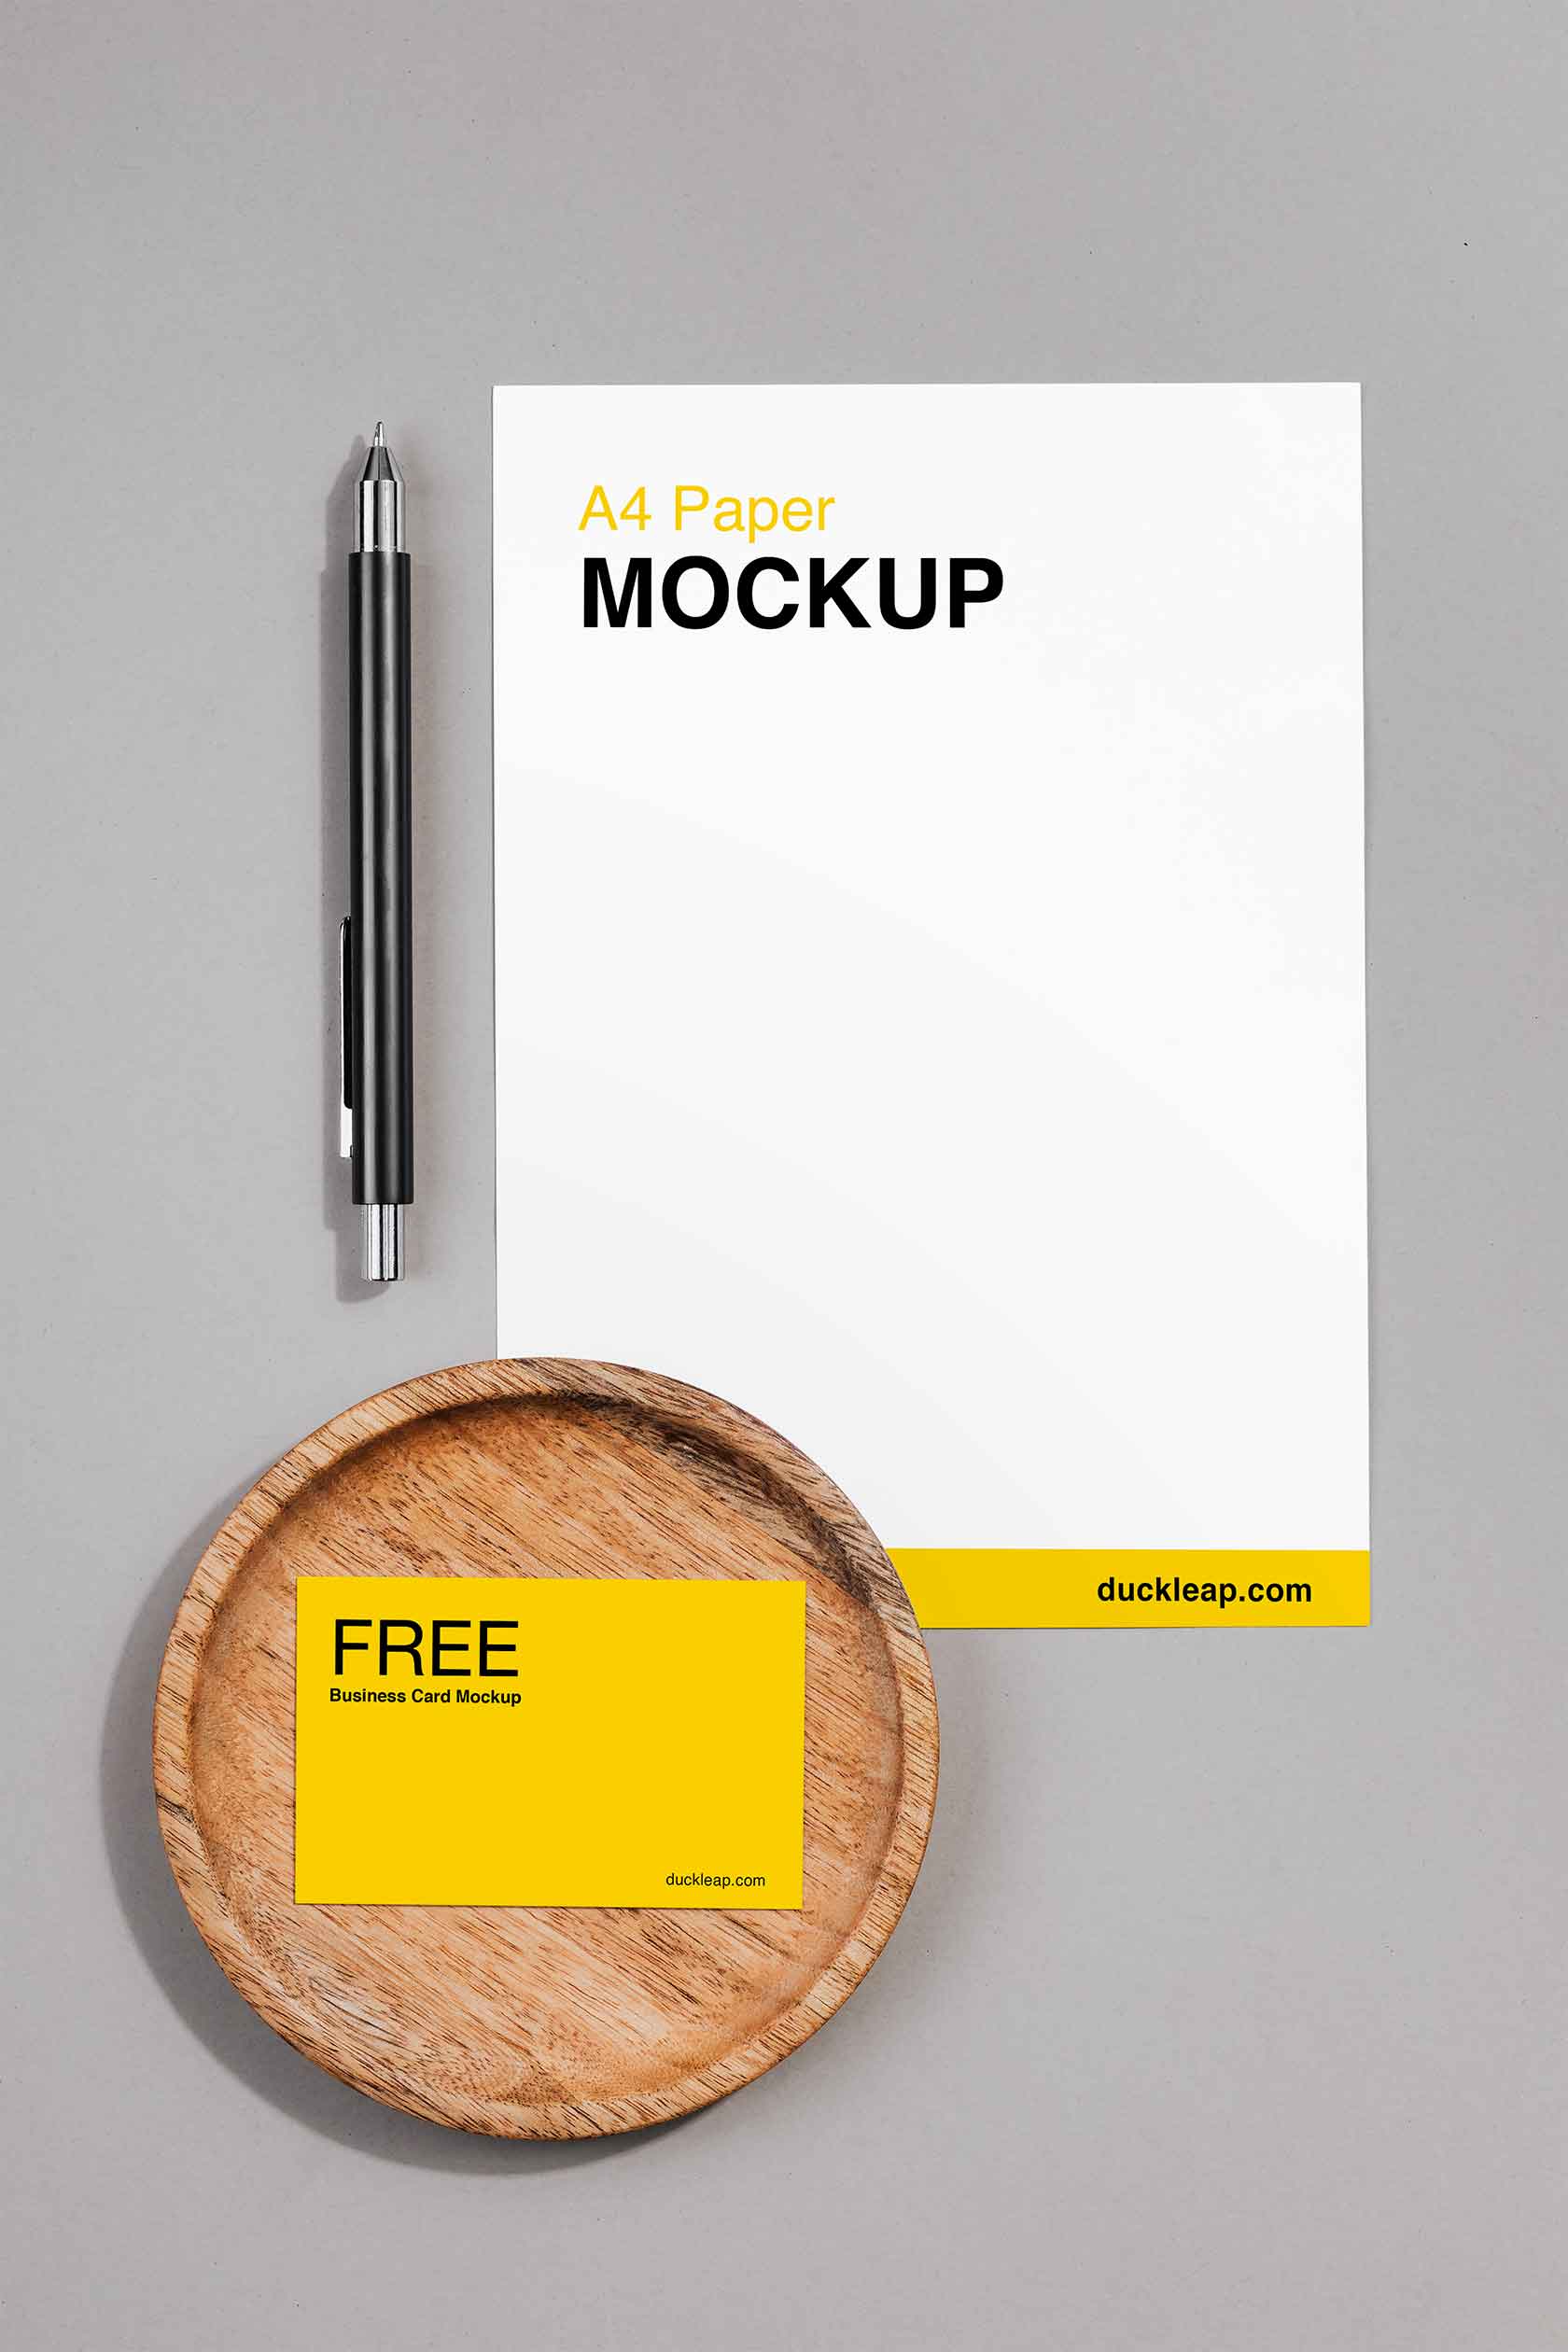 A4 Paper and Business Card Mockup